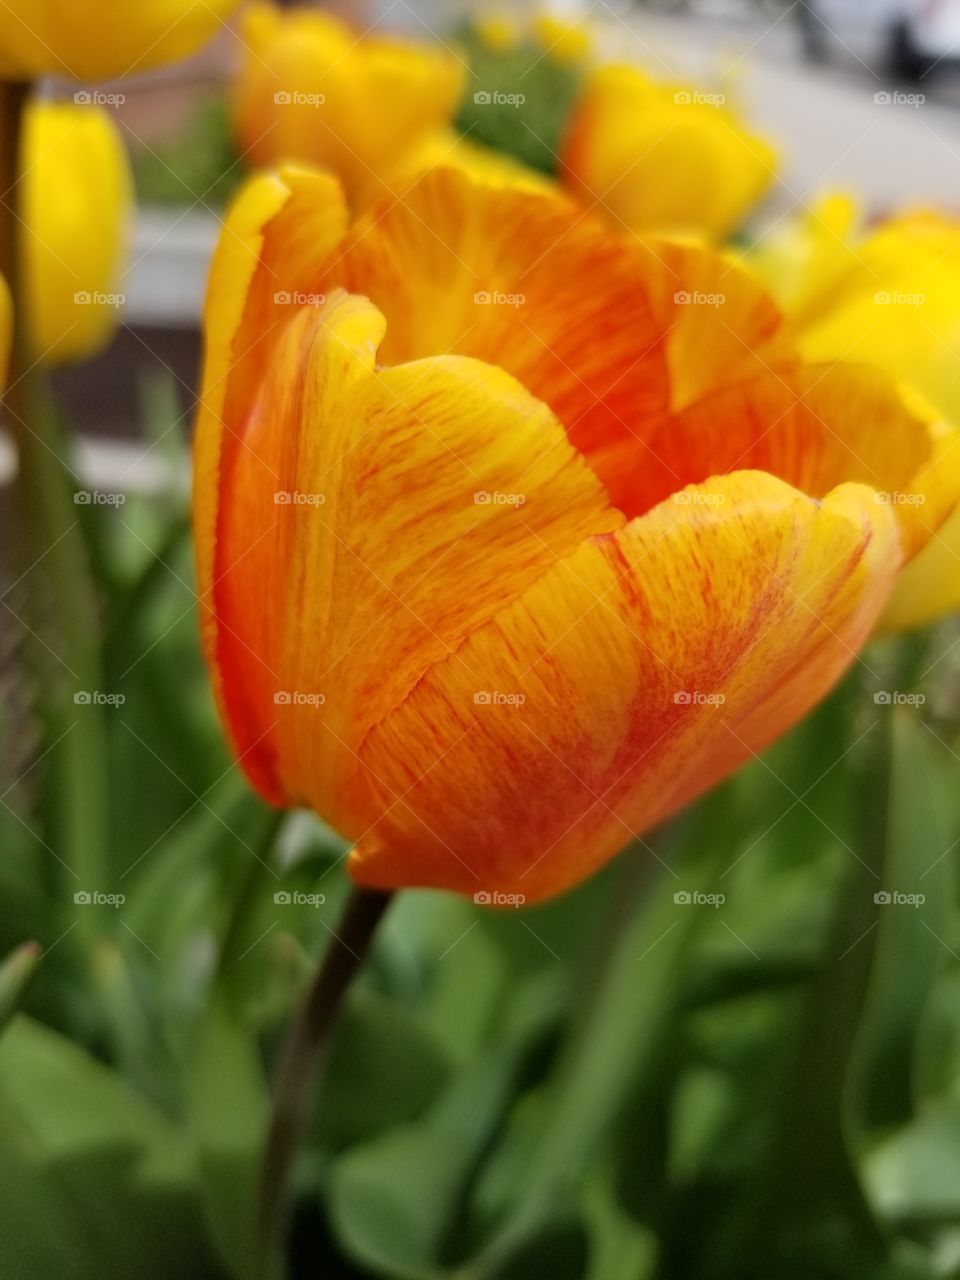 here we have different beautiful colors when rain falls and the sun shines on all flowers. Spring is here where life regrows and starts and new live and show off the amazing colors for us all to enjoy.